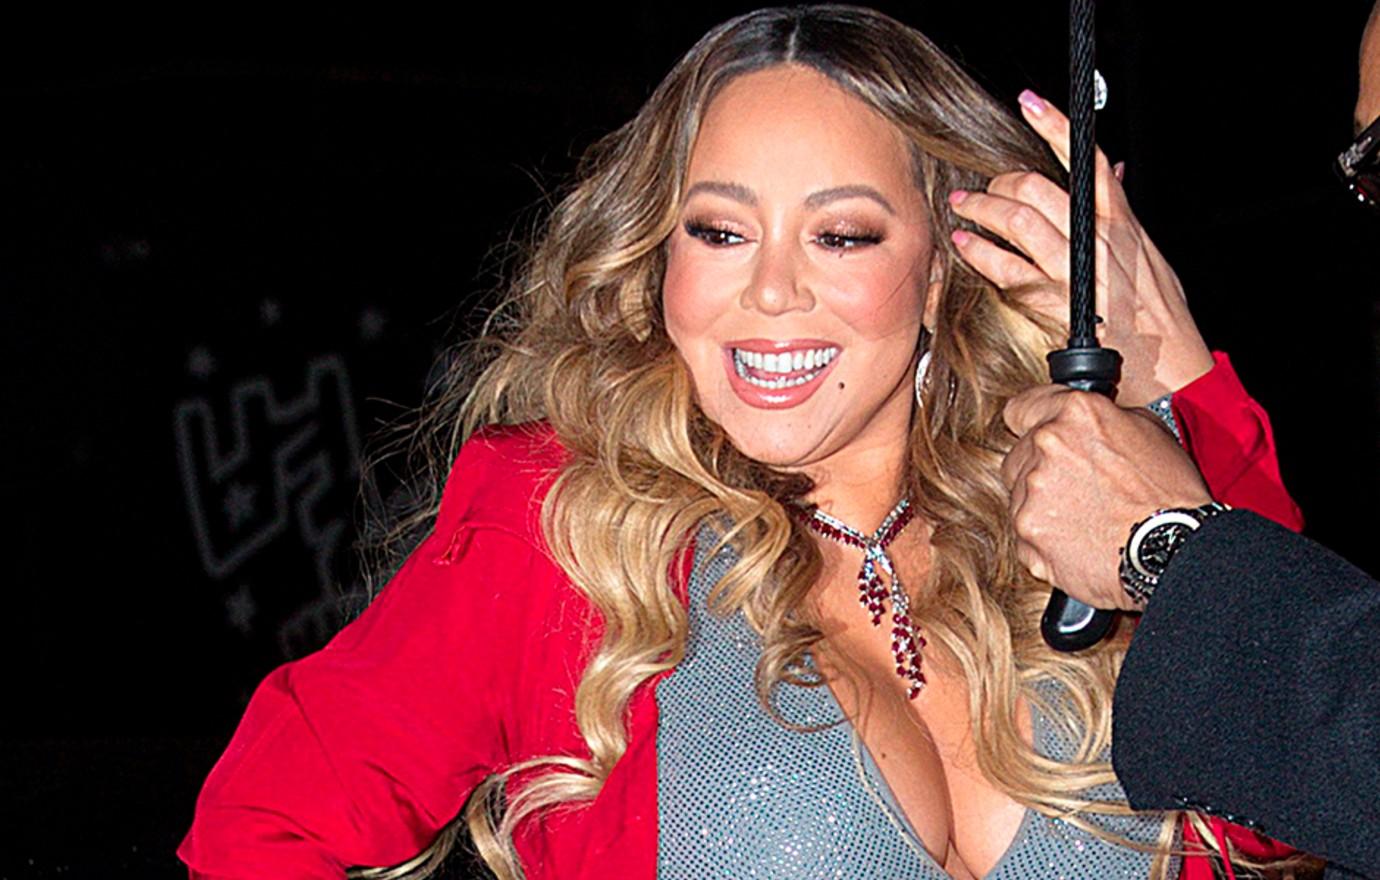 Mariah Carey Shows Off Her Bad Side In Playful New Years Snapshot 